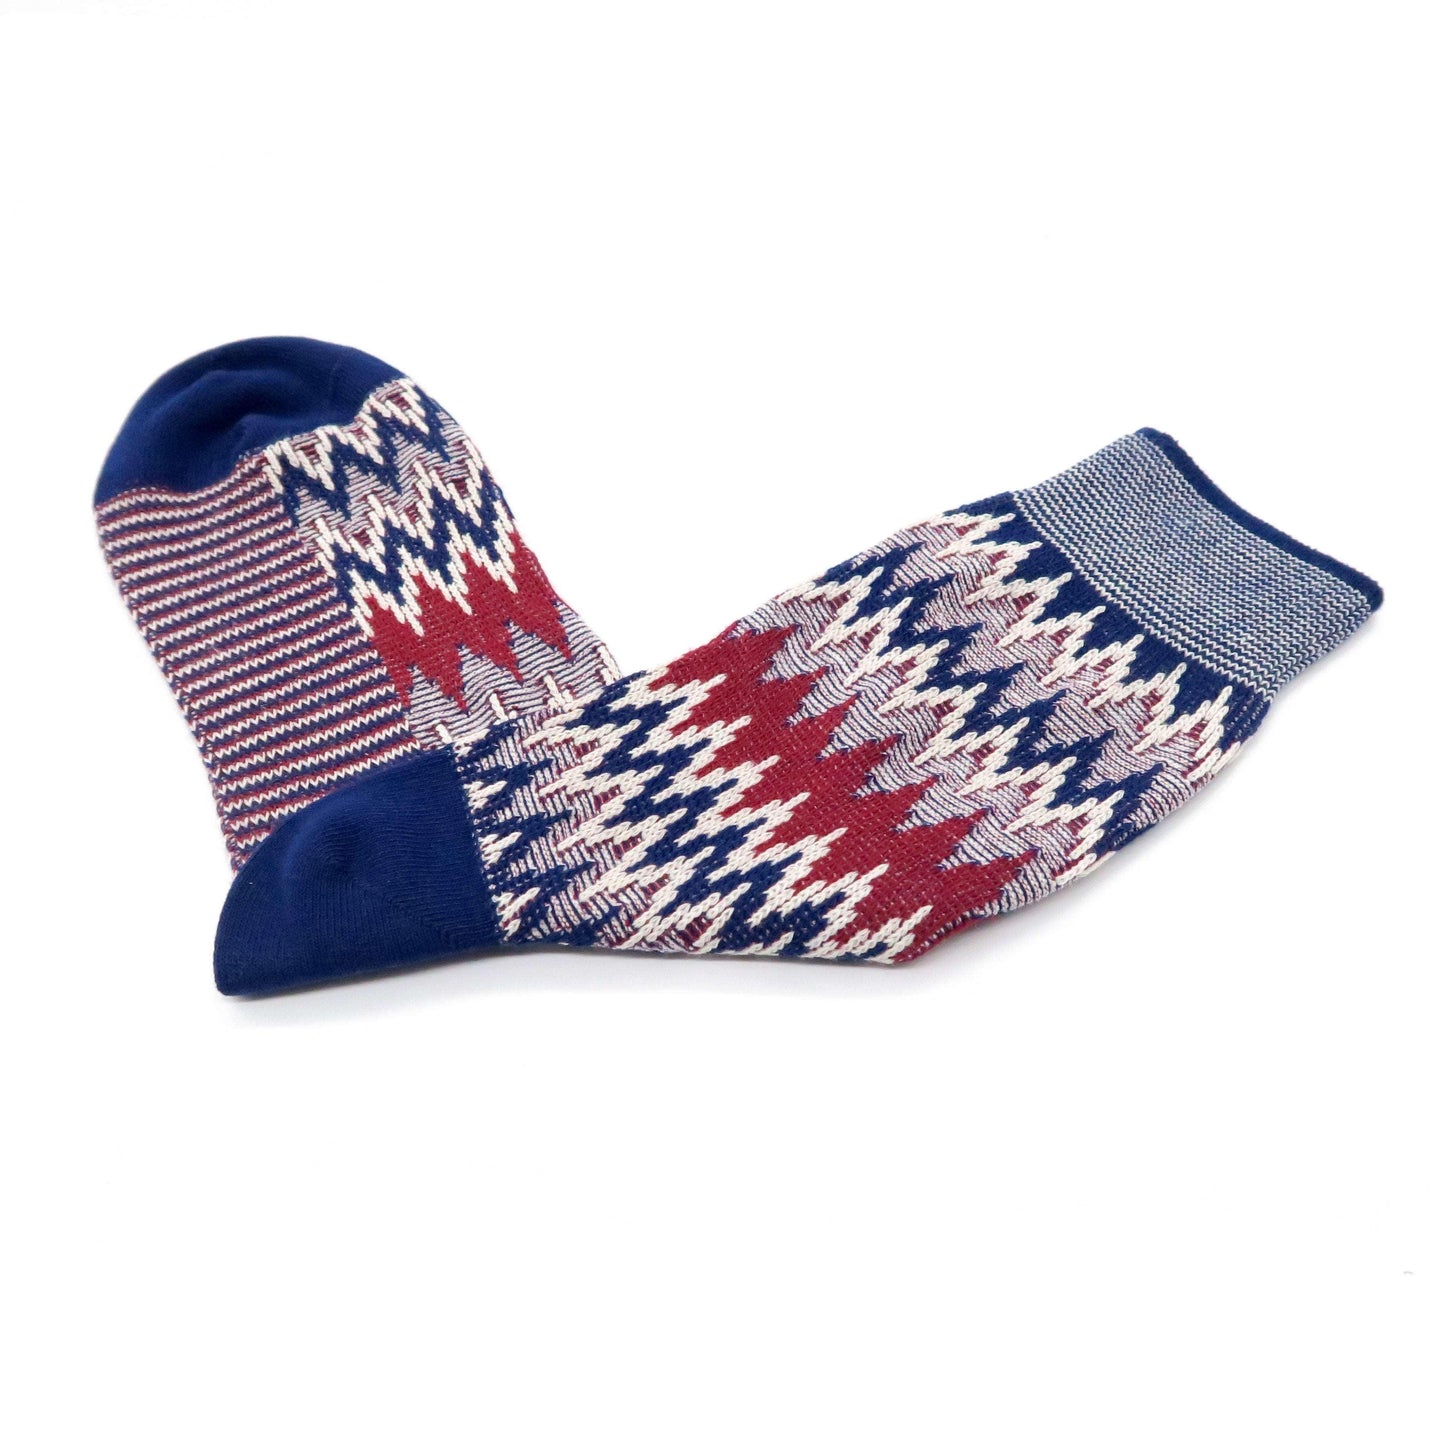 funky zig zag socks with navy and red color